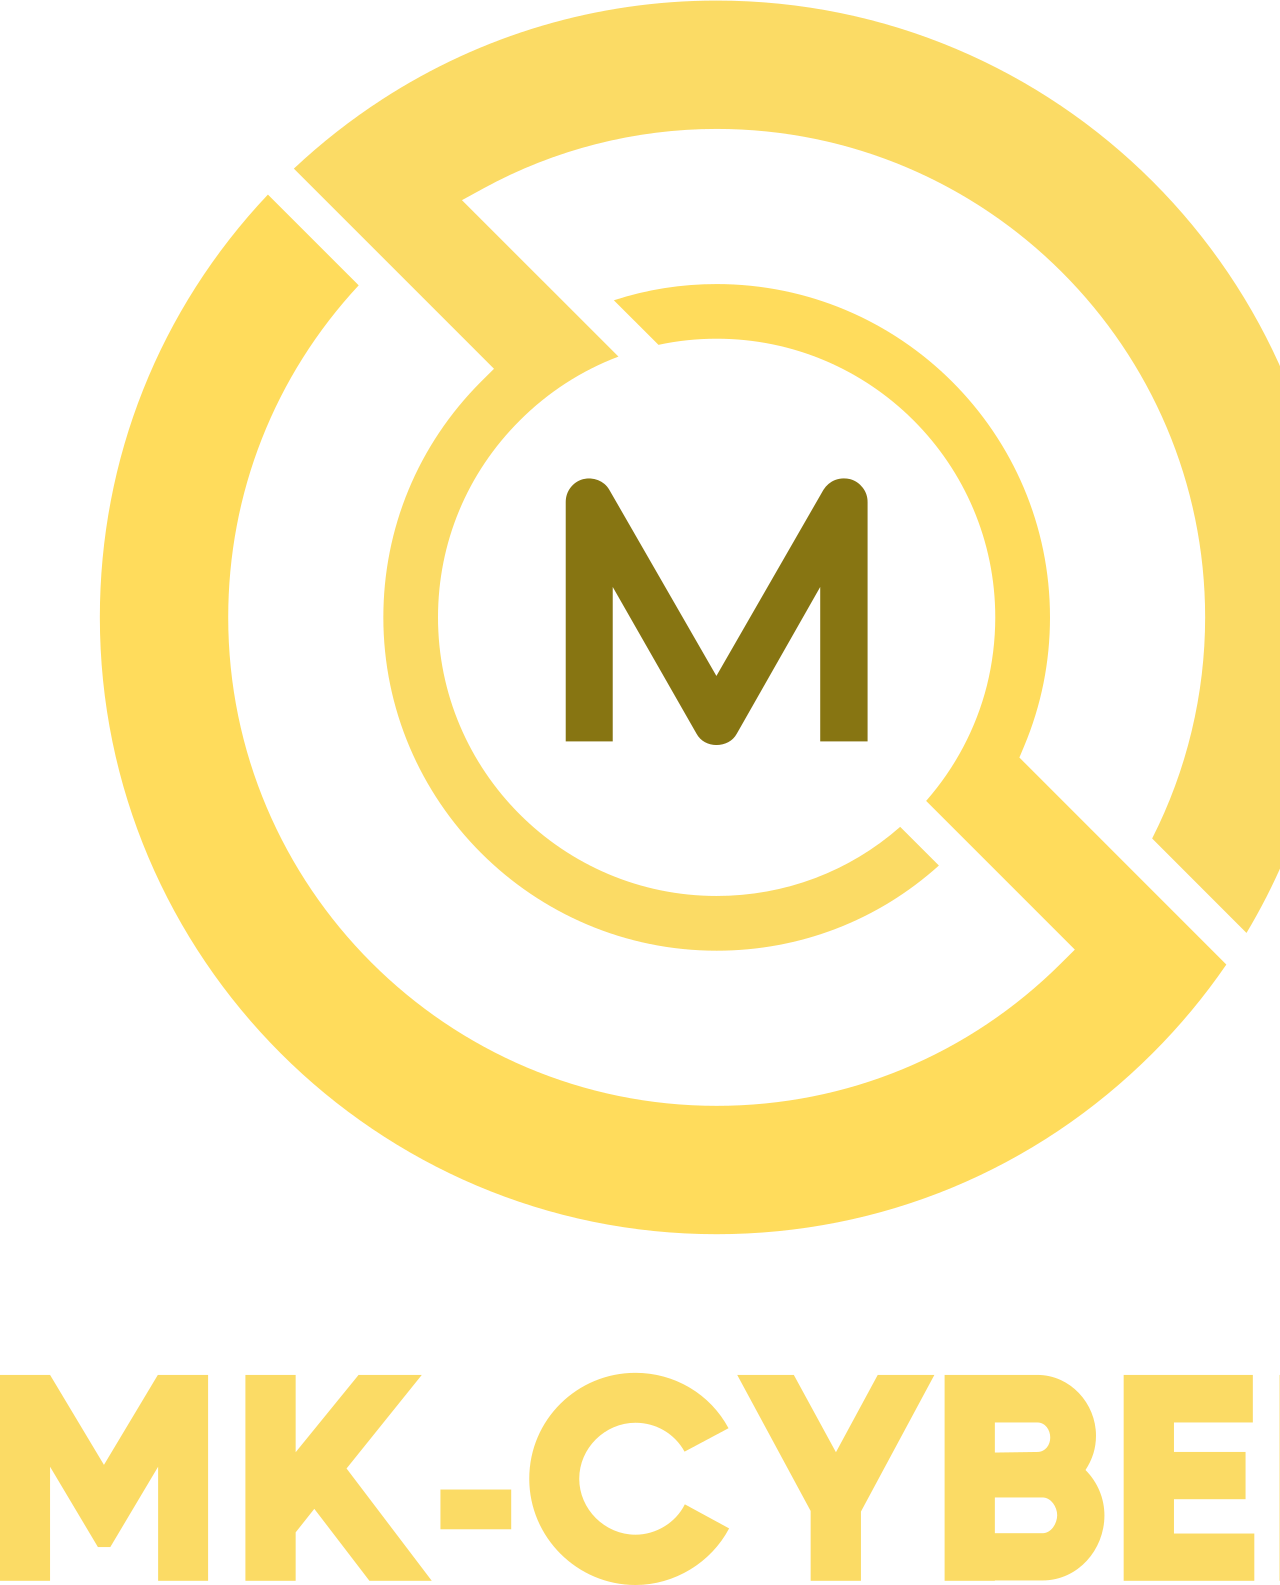 MKX CYBER's web page